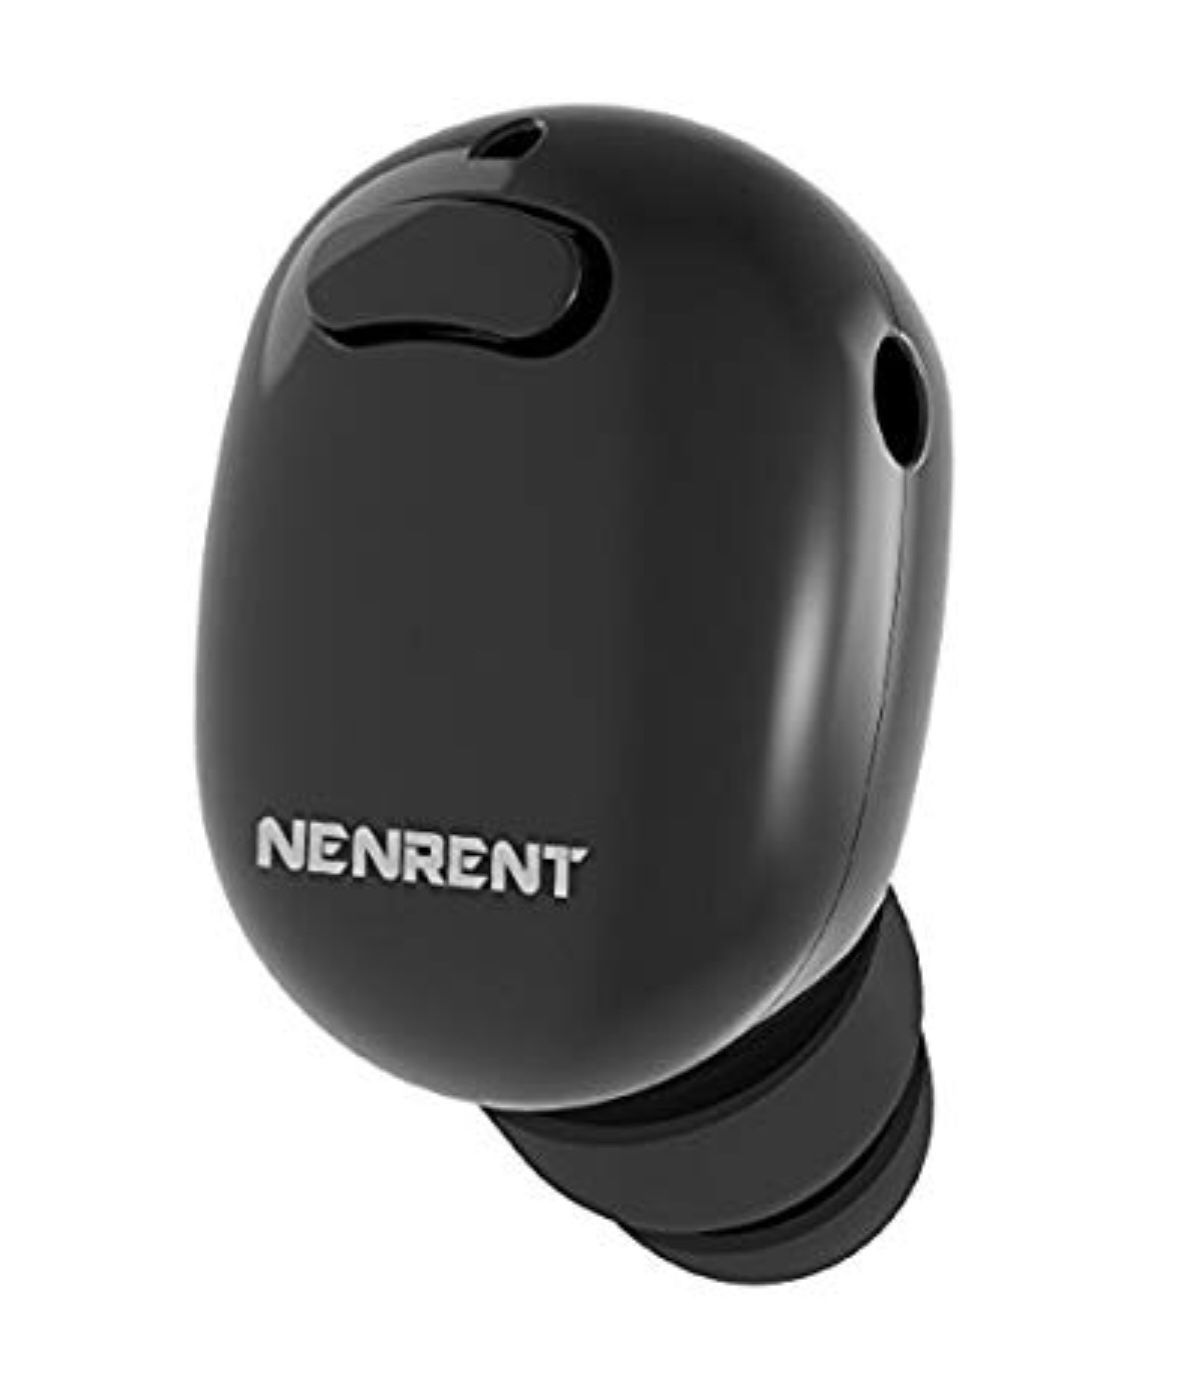 NENRENT S570 Bluetooth Earbud,Smallest Mini Invisible V4.1 Wireless Bluetooth Earpiece Headset Headphone Earphone with Mic Hands- (black / pink)